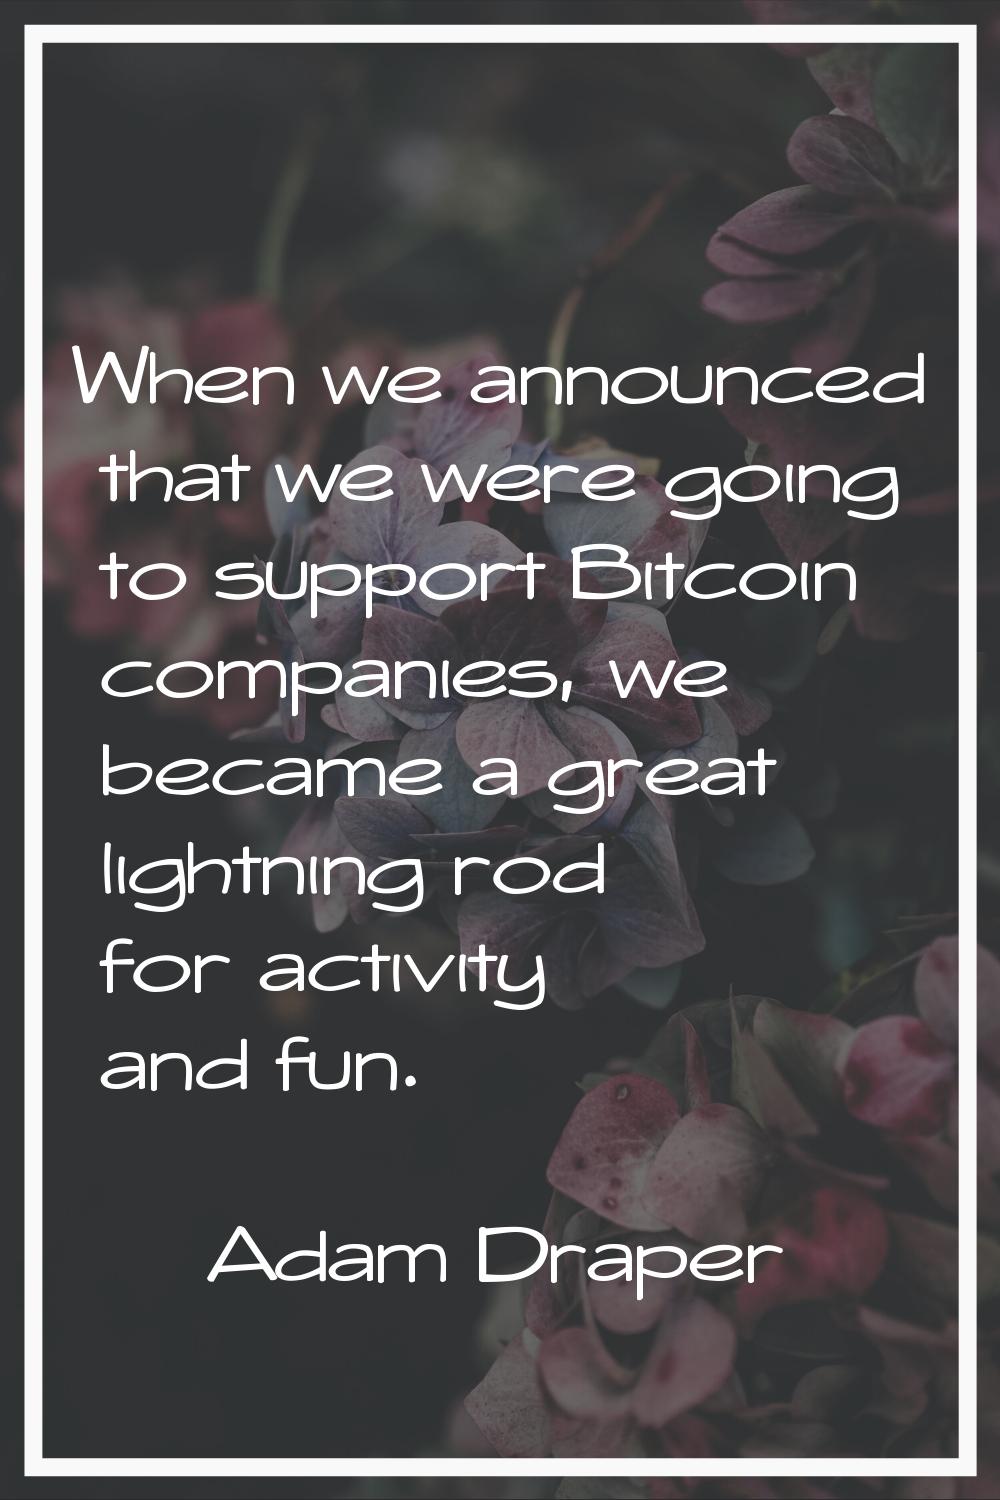 When we announced that we were going to support Bitcoin companies, we became a great lightning rod 